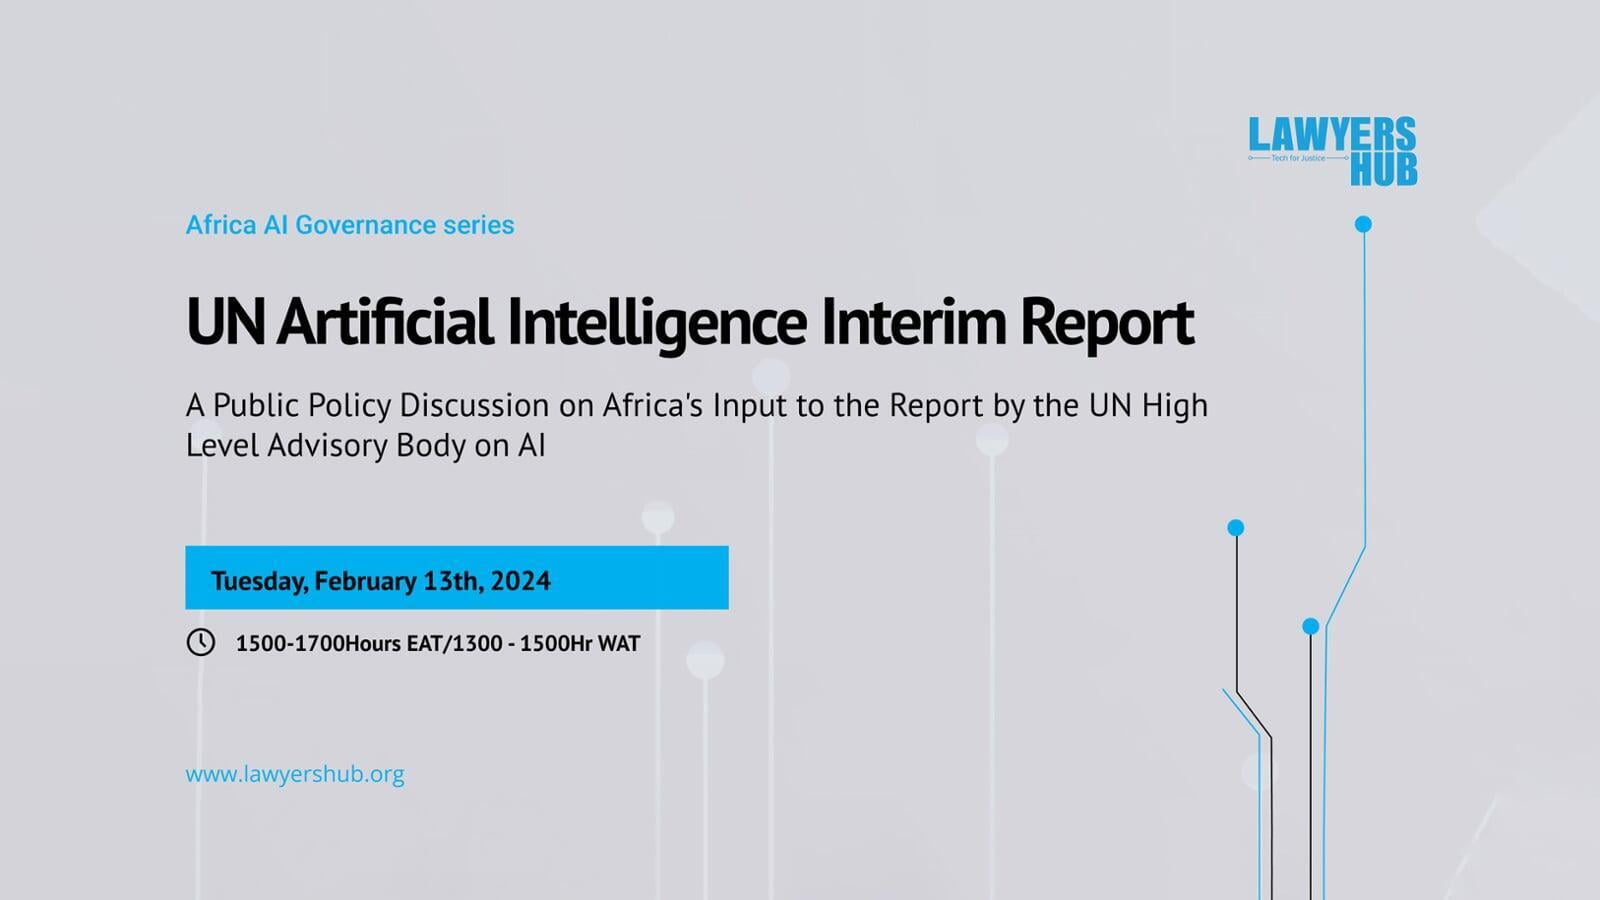 Decoding the Public Policy Dialogue on the UN Artificial Intelligence Interim Report